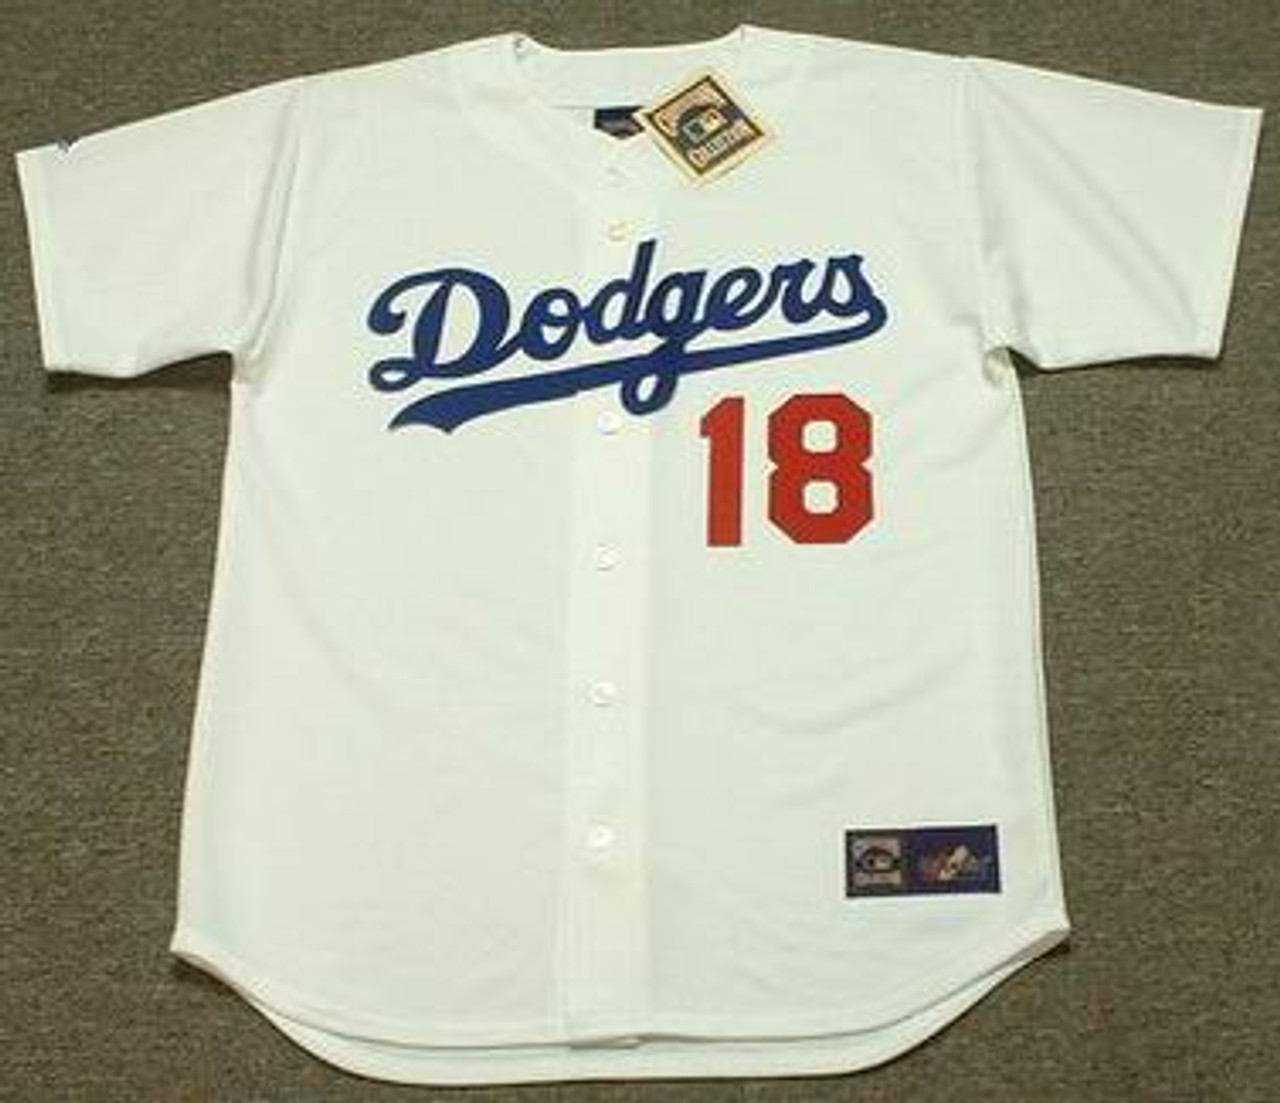 Bill Russell Jersey - Los Angeles Dodgers 1981 Home Throwback MLB Jersey